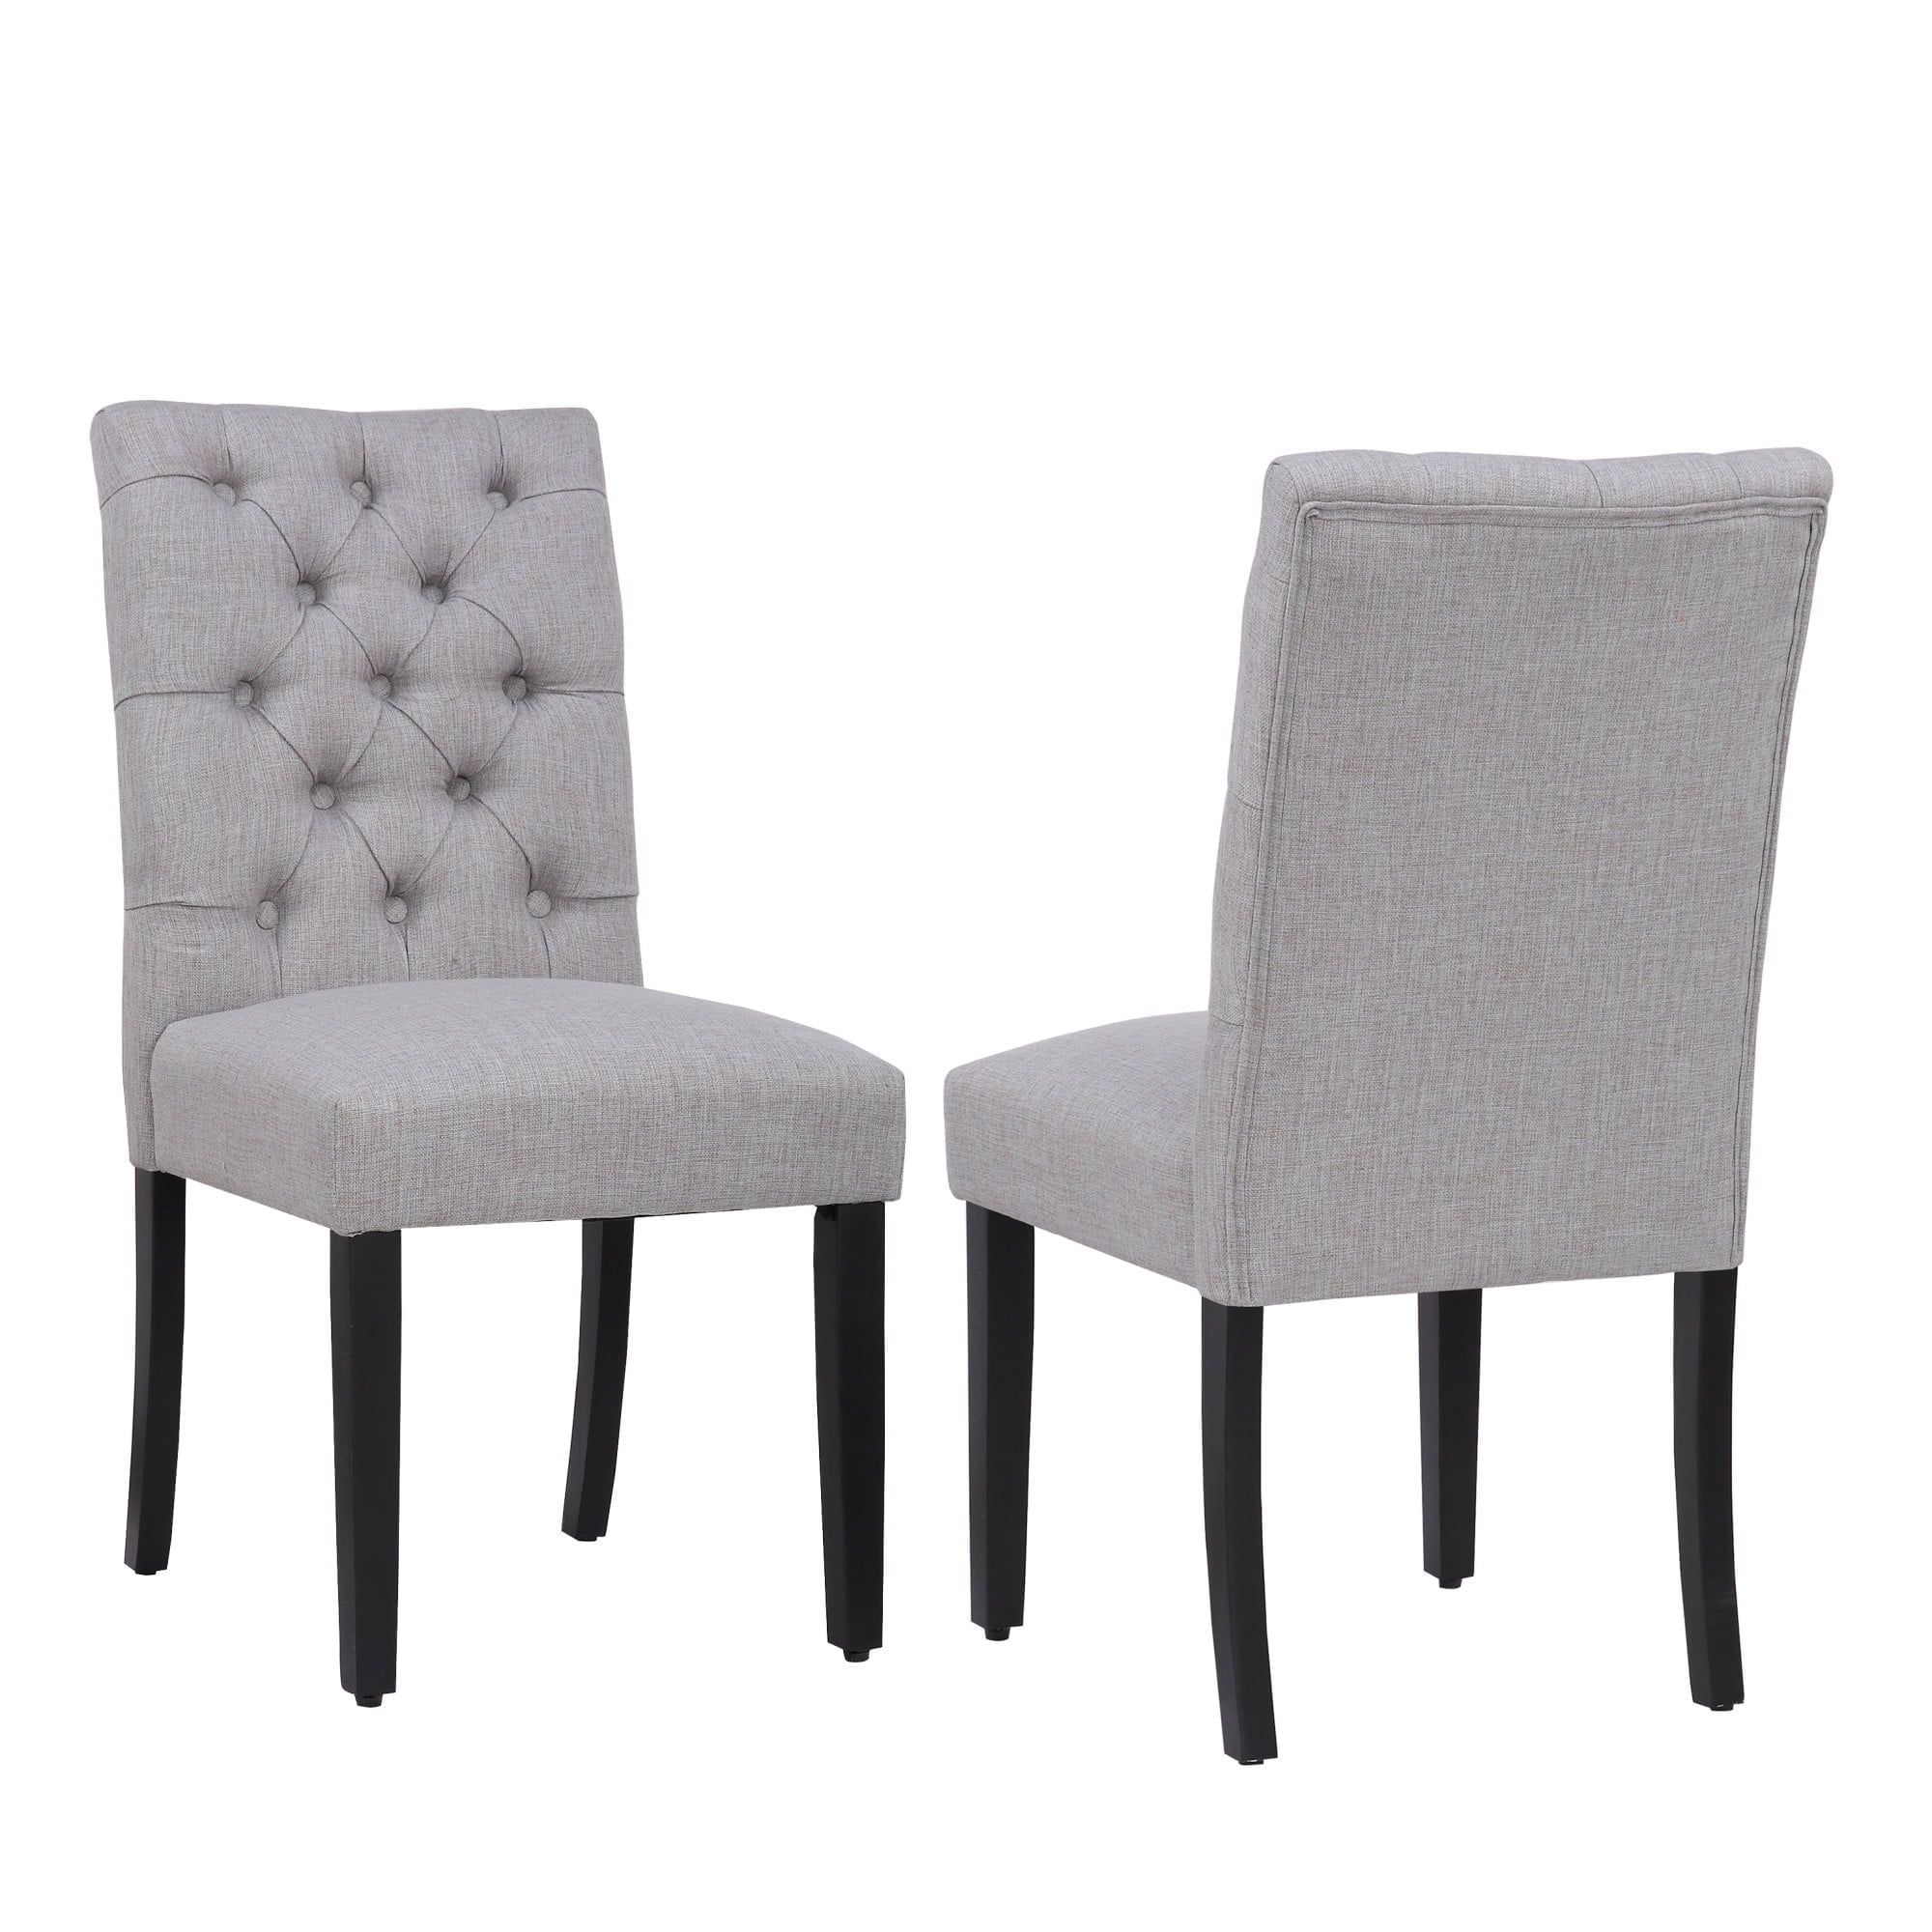 High Parsons Linen Upholstered Side Chair in Gray